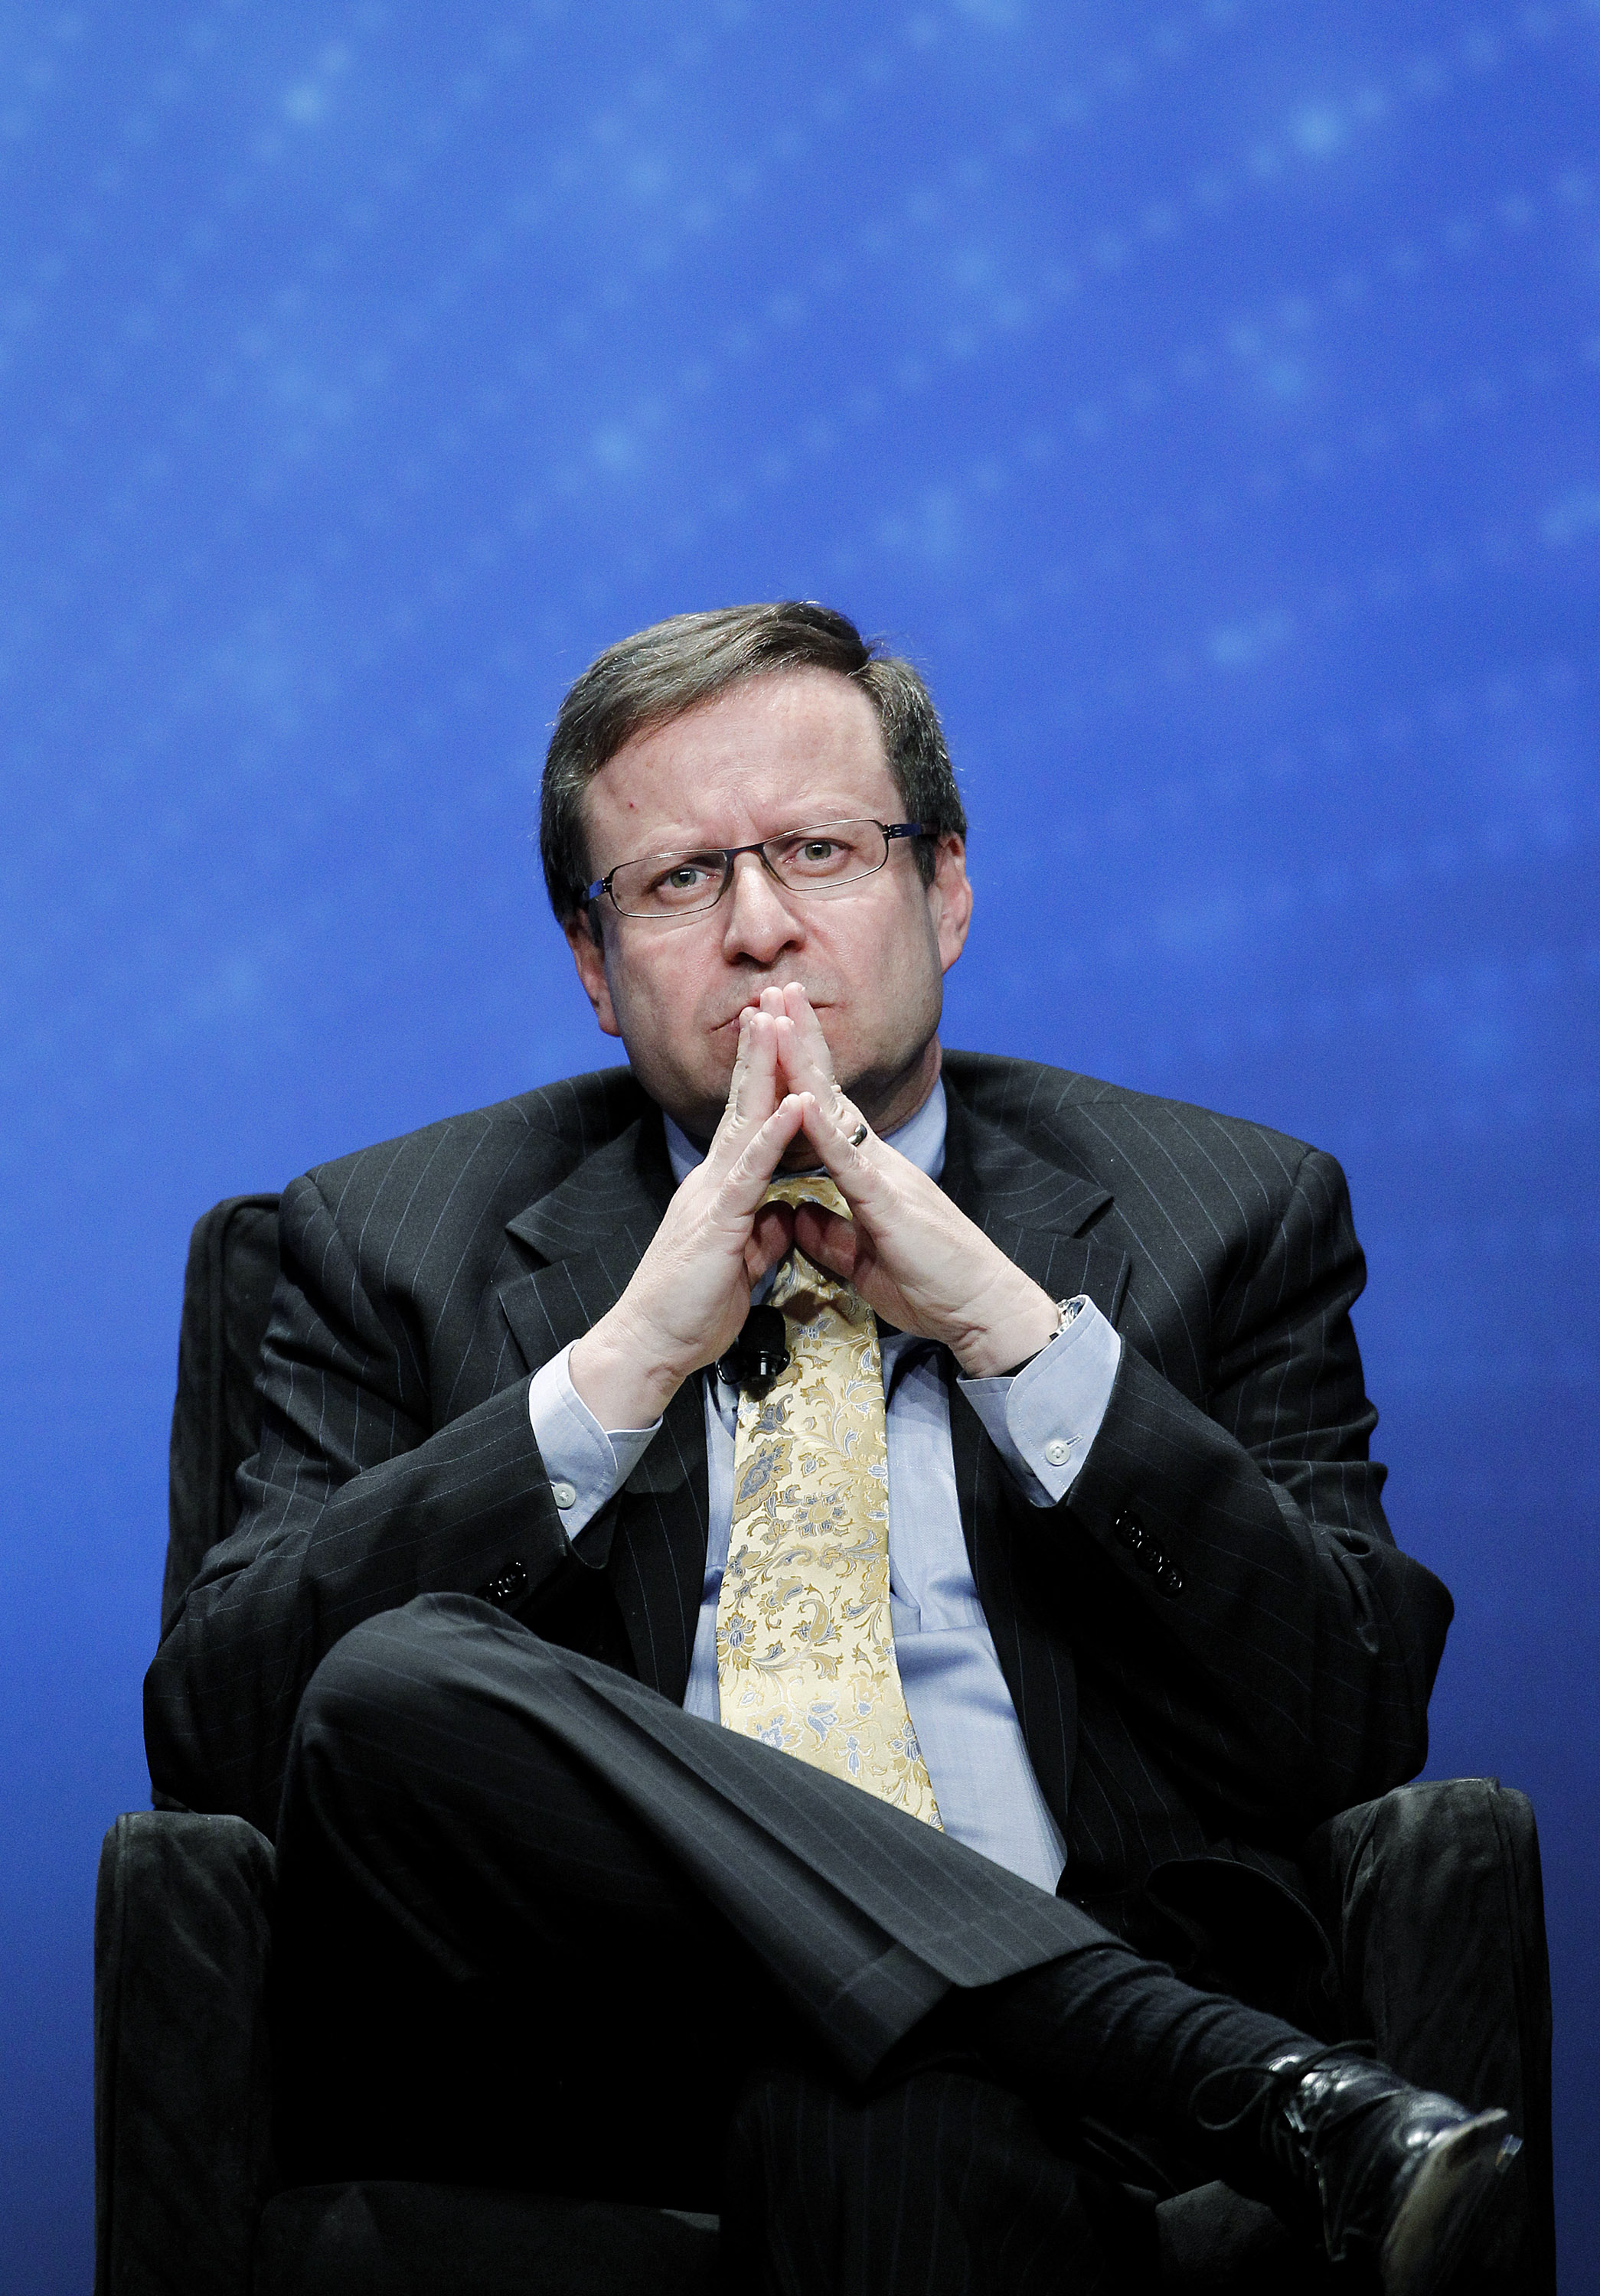 Steven Koonin, under secretary for science at the U.S. Department of Energy, listens during the 2011 CERAWEEK conference in Houston on March 11, 2011. (Bloomberg&mdash;Bloomberg via Getty Images)